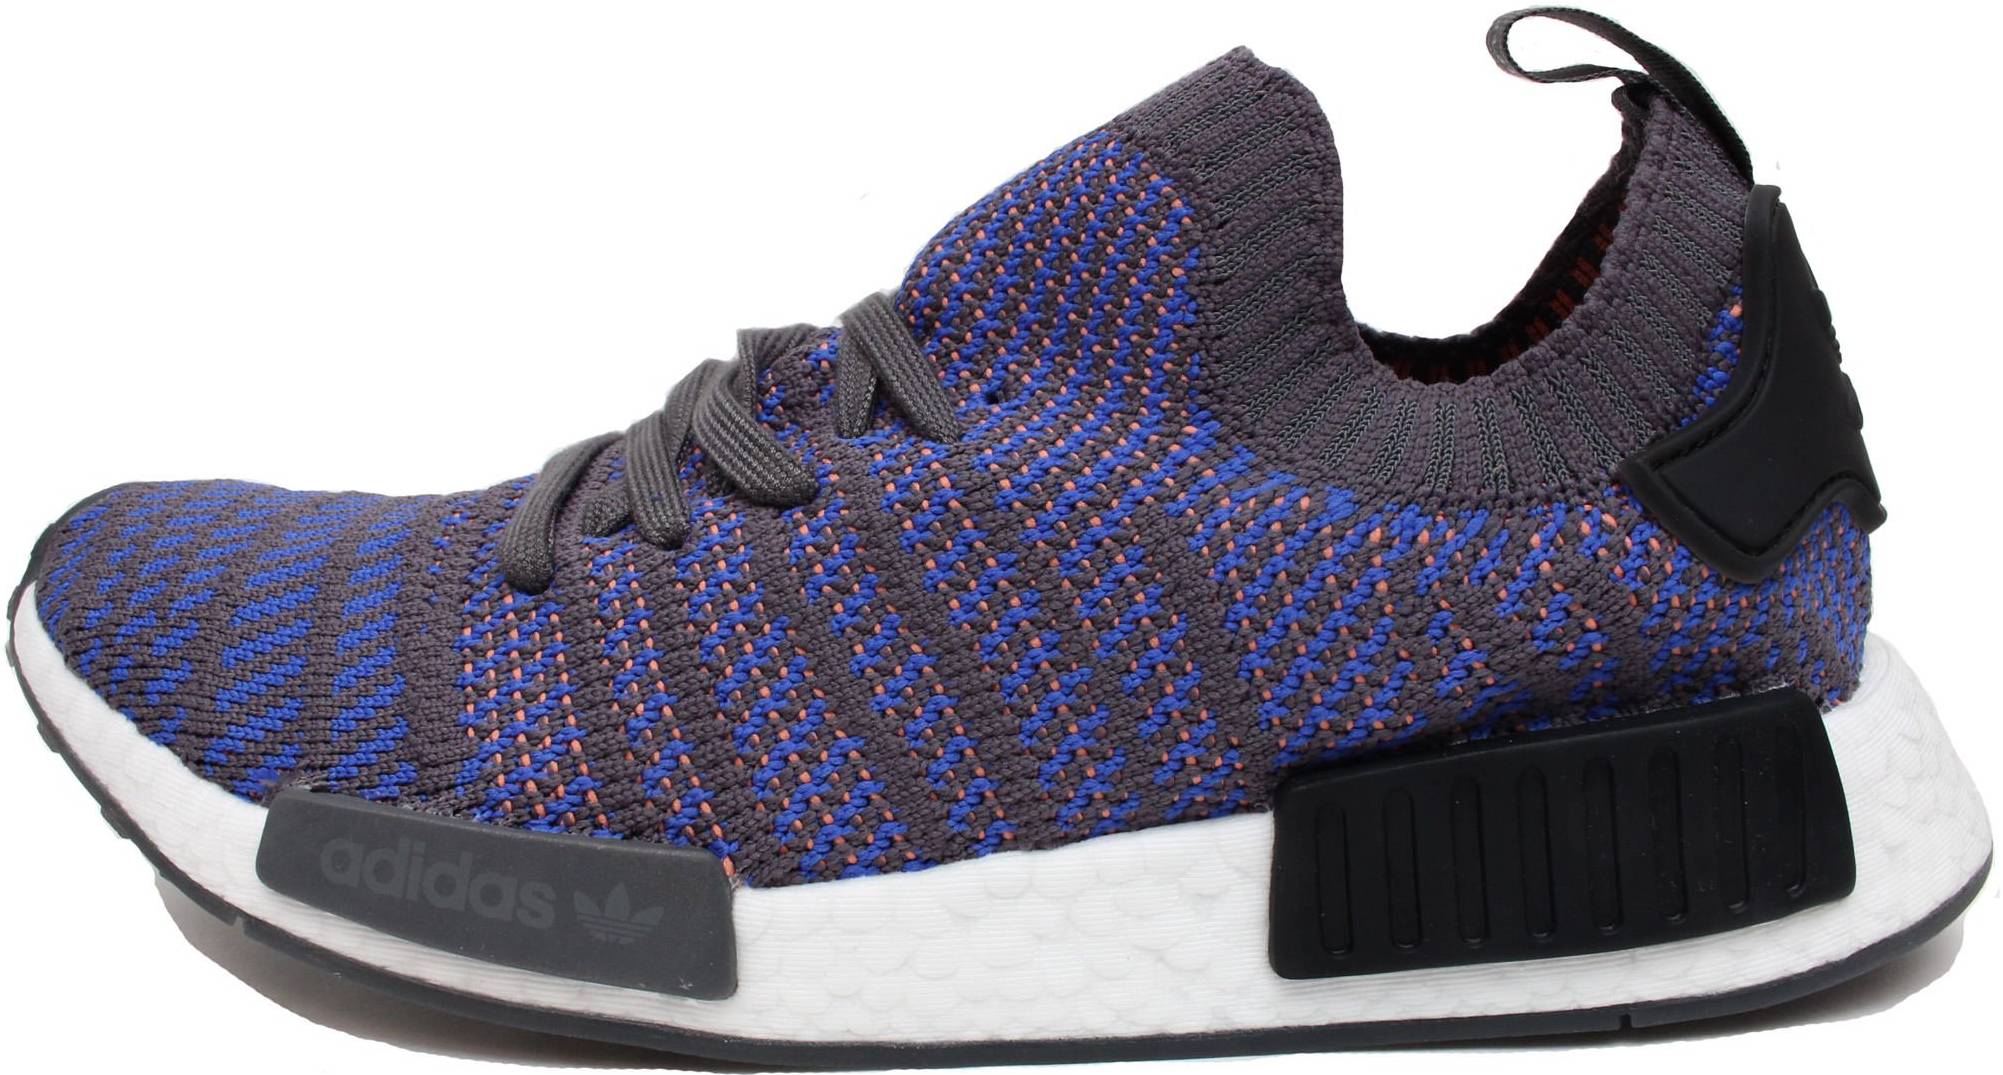 La cabra Billy FALSO Juguetón Adidas NMD_R1 STLT Primeknit sneakers in 10+ colors (only $50) | RunRepeat